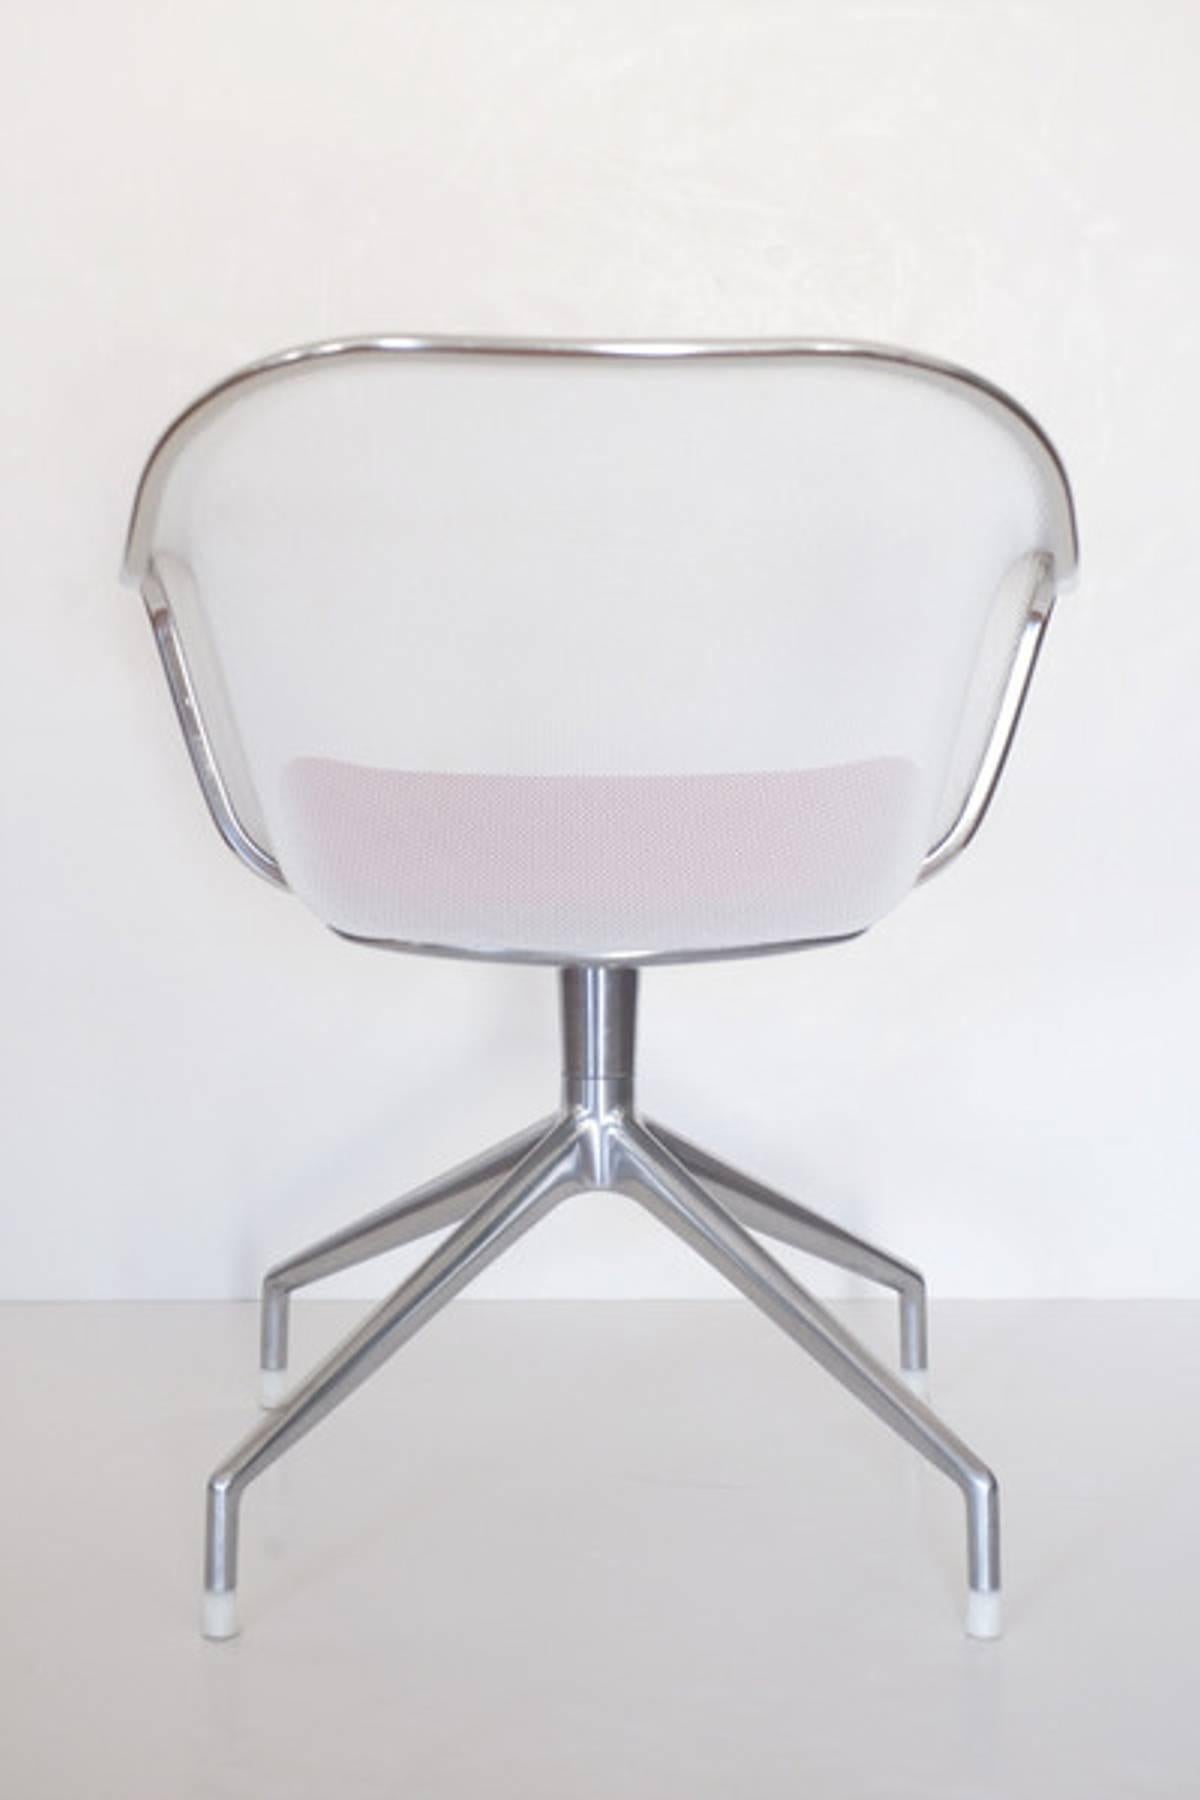 Antonio Citterio designed this pair of Iuta swivel armchairs for B&B Italia. Polished aluminum legs, painted wire mesh, and cotton candy fabric produce an exceptional look. A good choice for a sophisticated conference room, hotel lobby, restaurant,